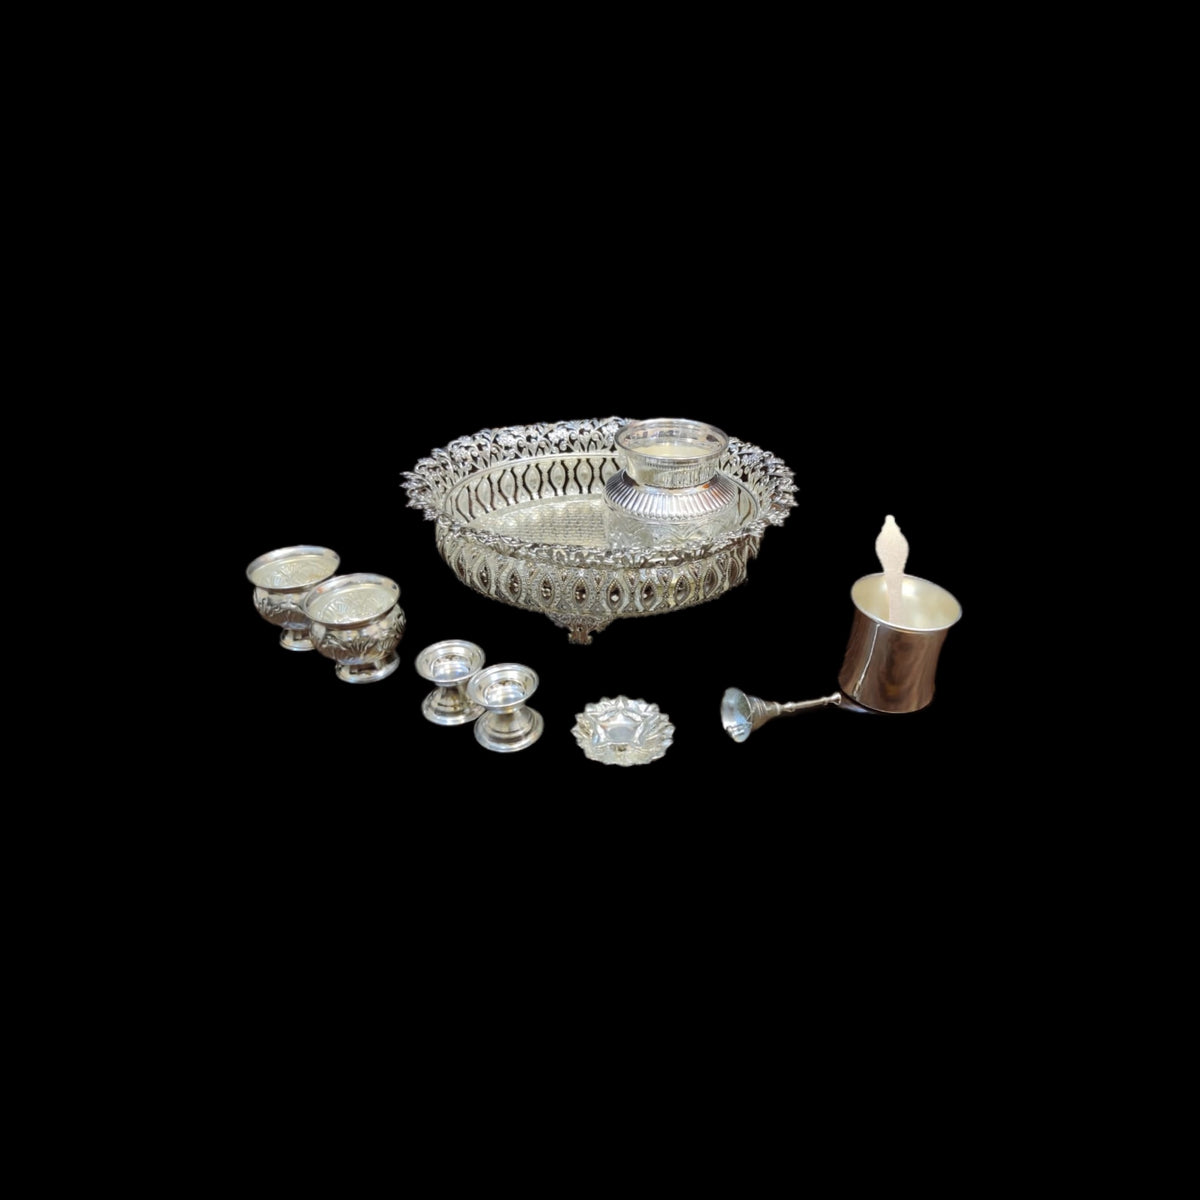 Shop Now for Puja Items Online  Brass and German Silver Pooja